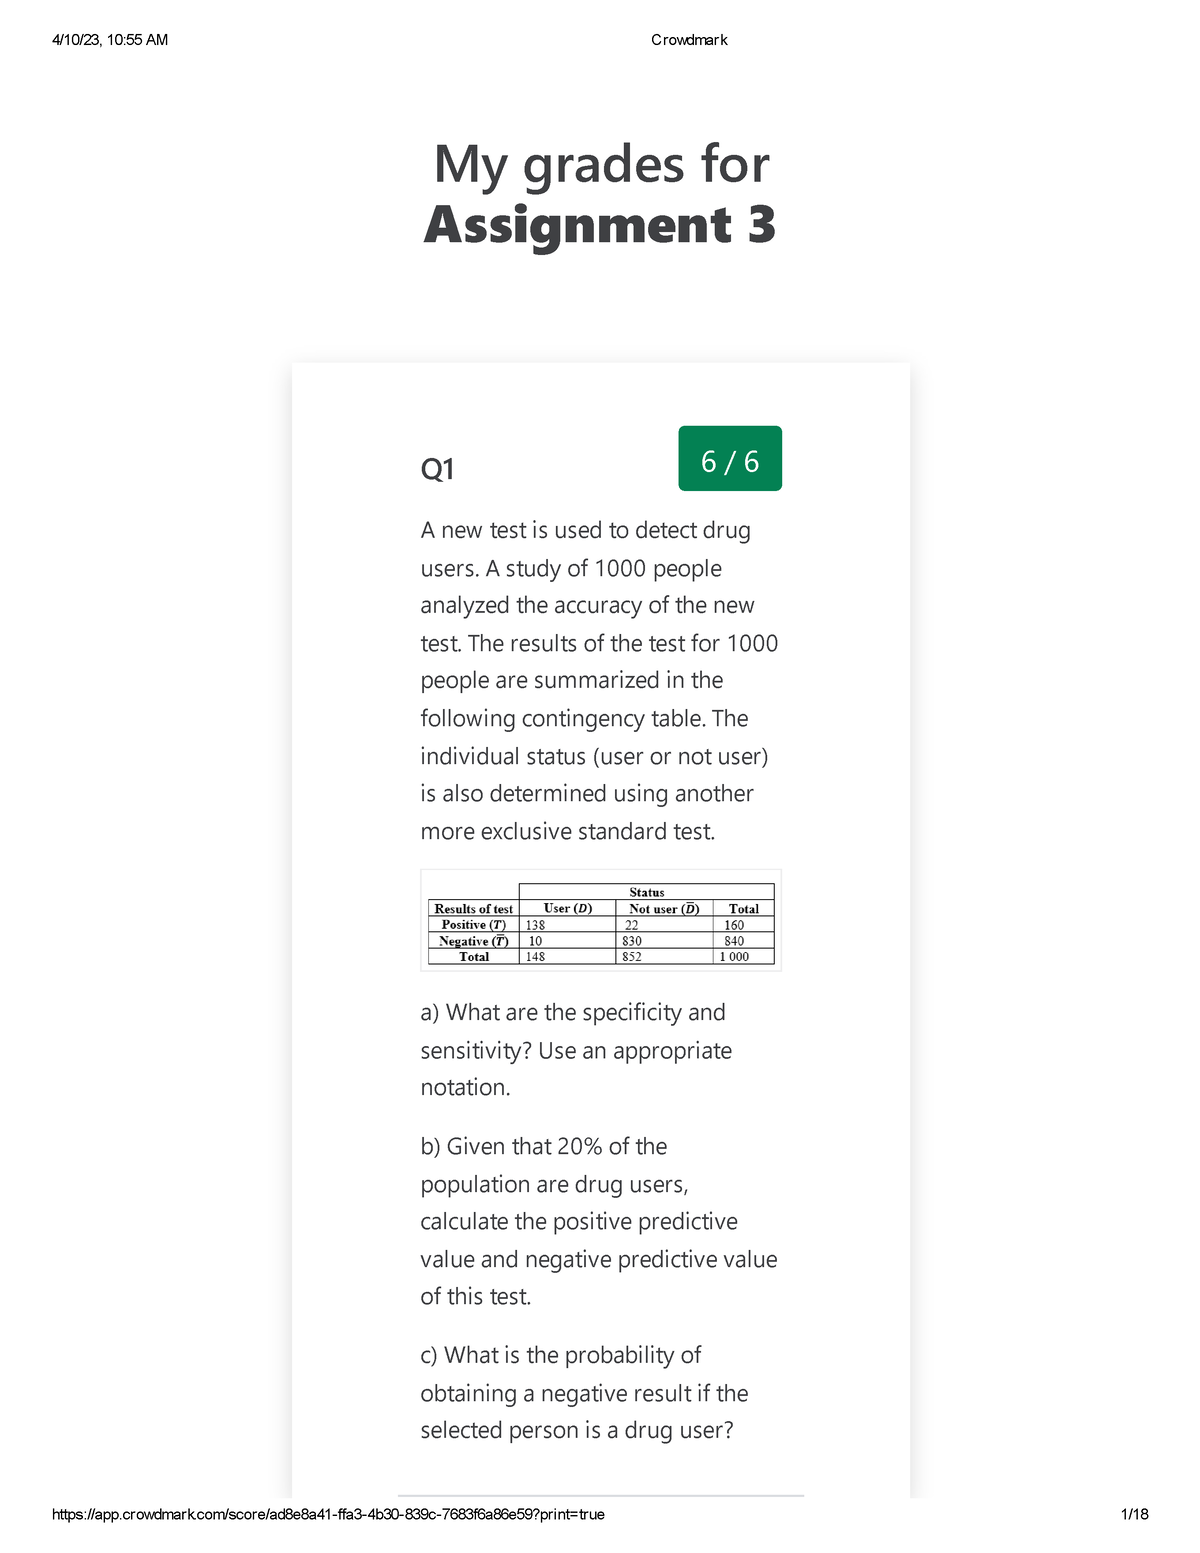 english 1501 assignment 3